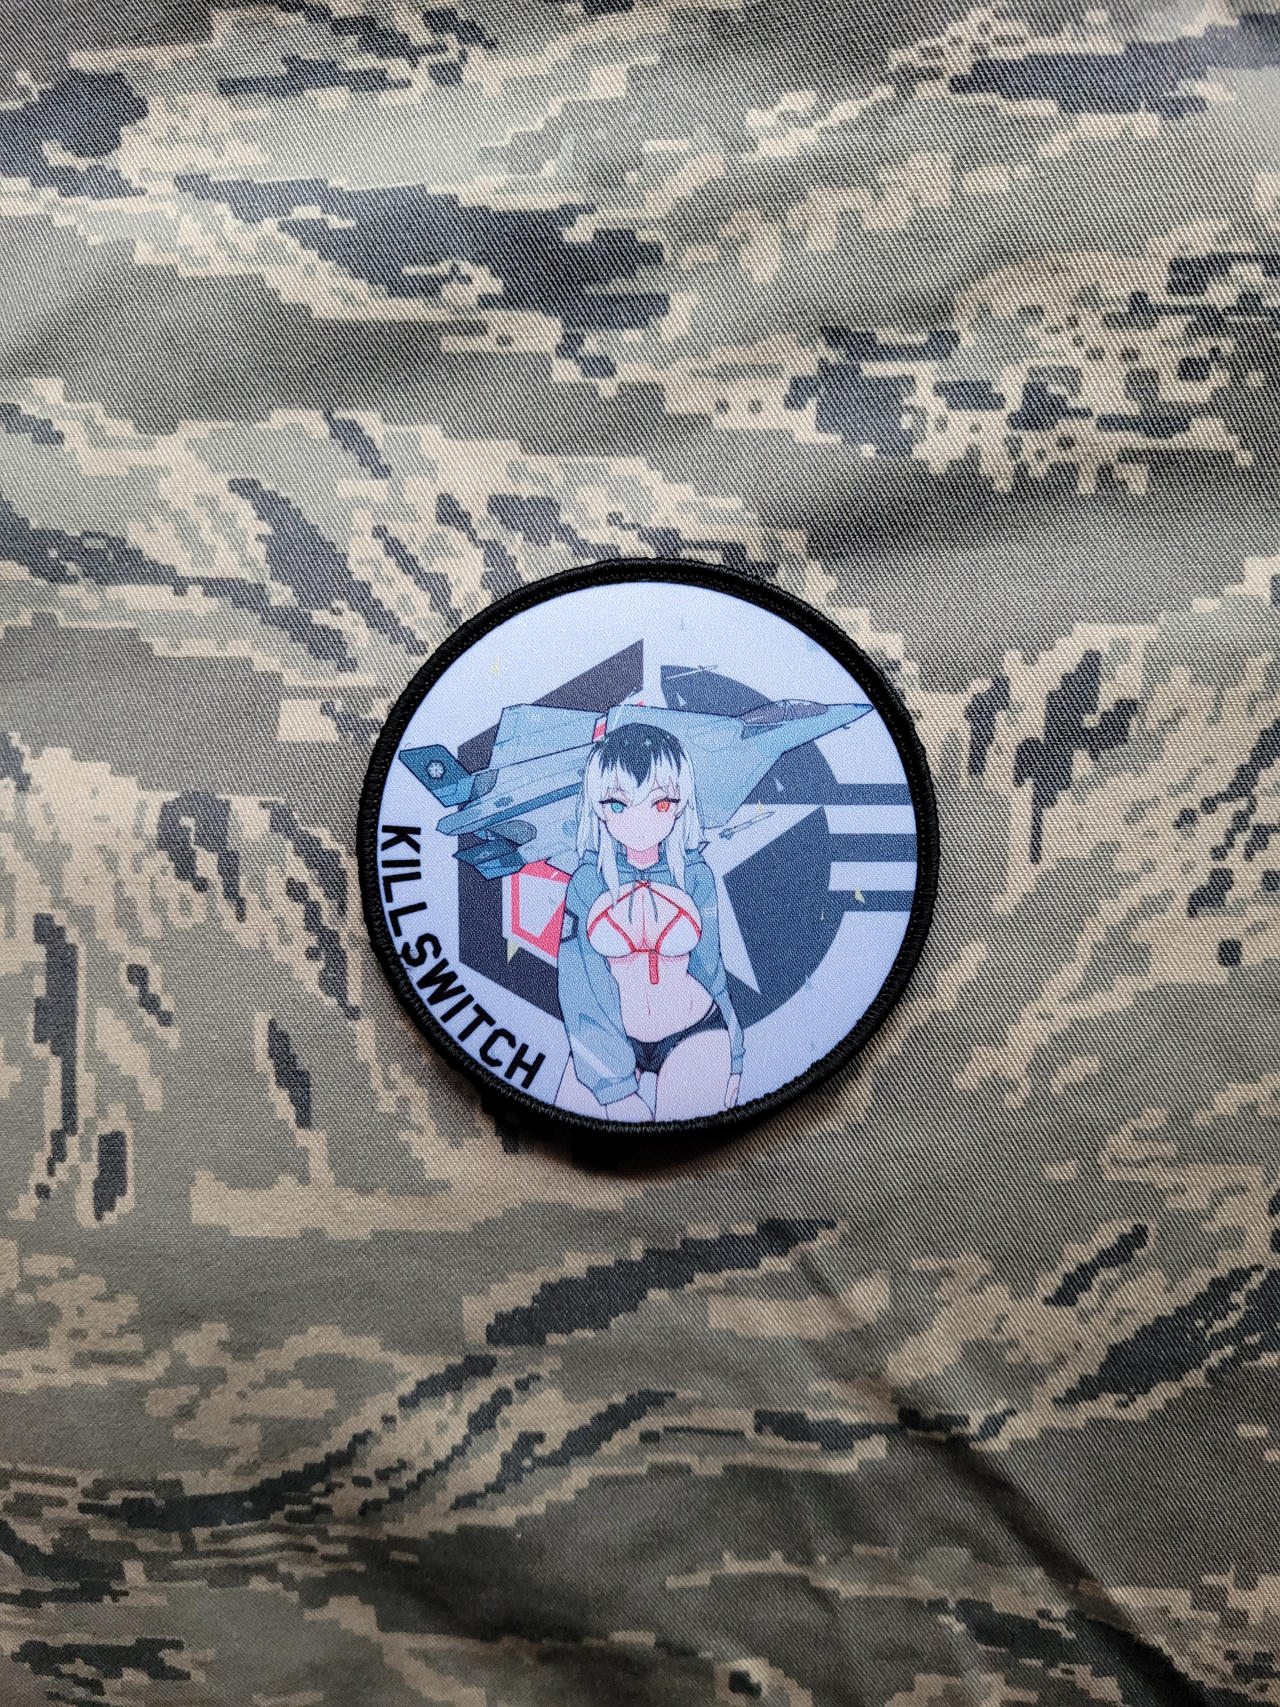 Plate Carrier Kill Patches